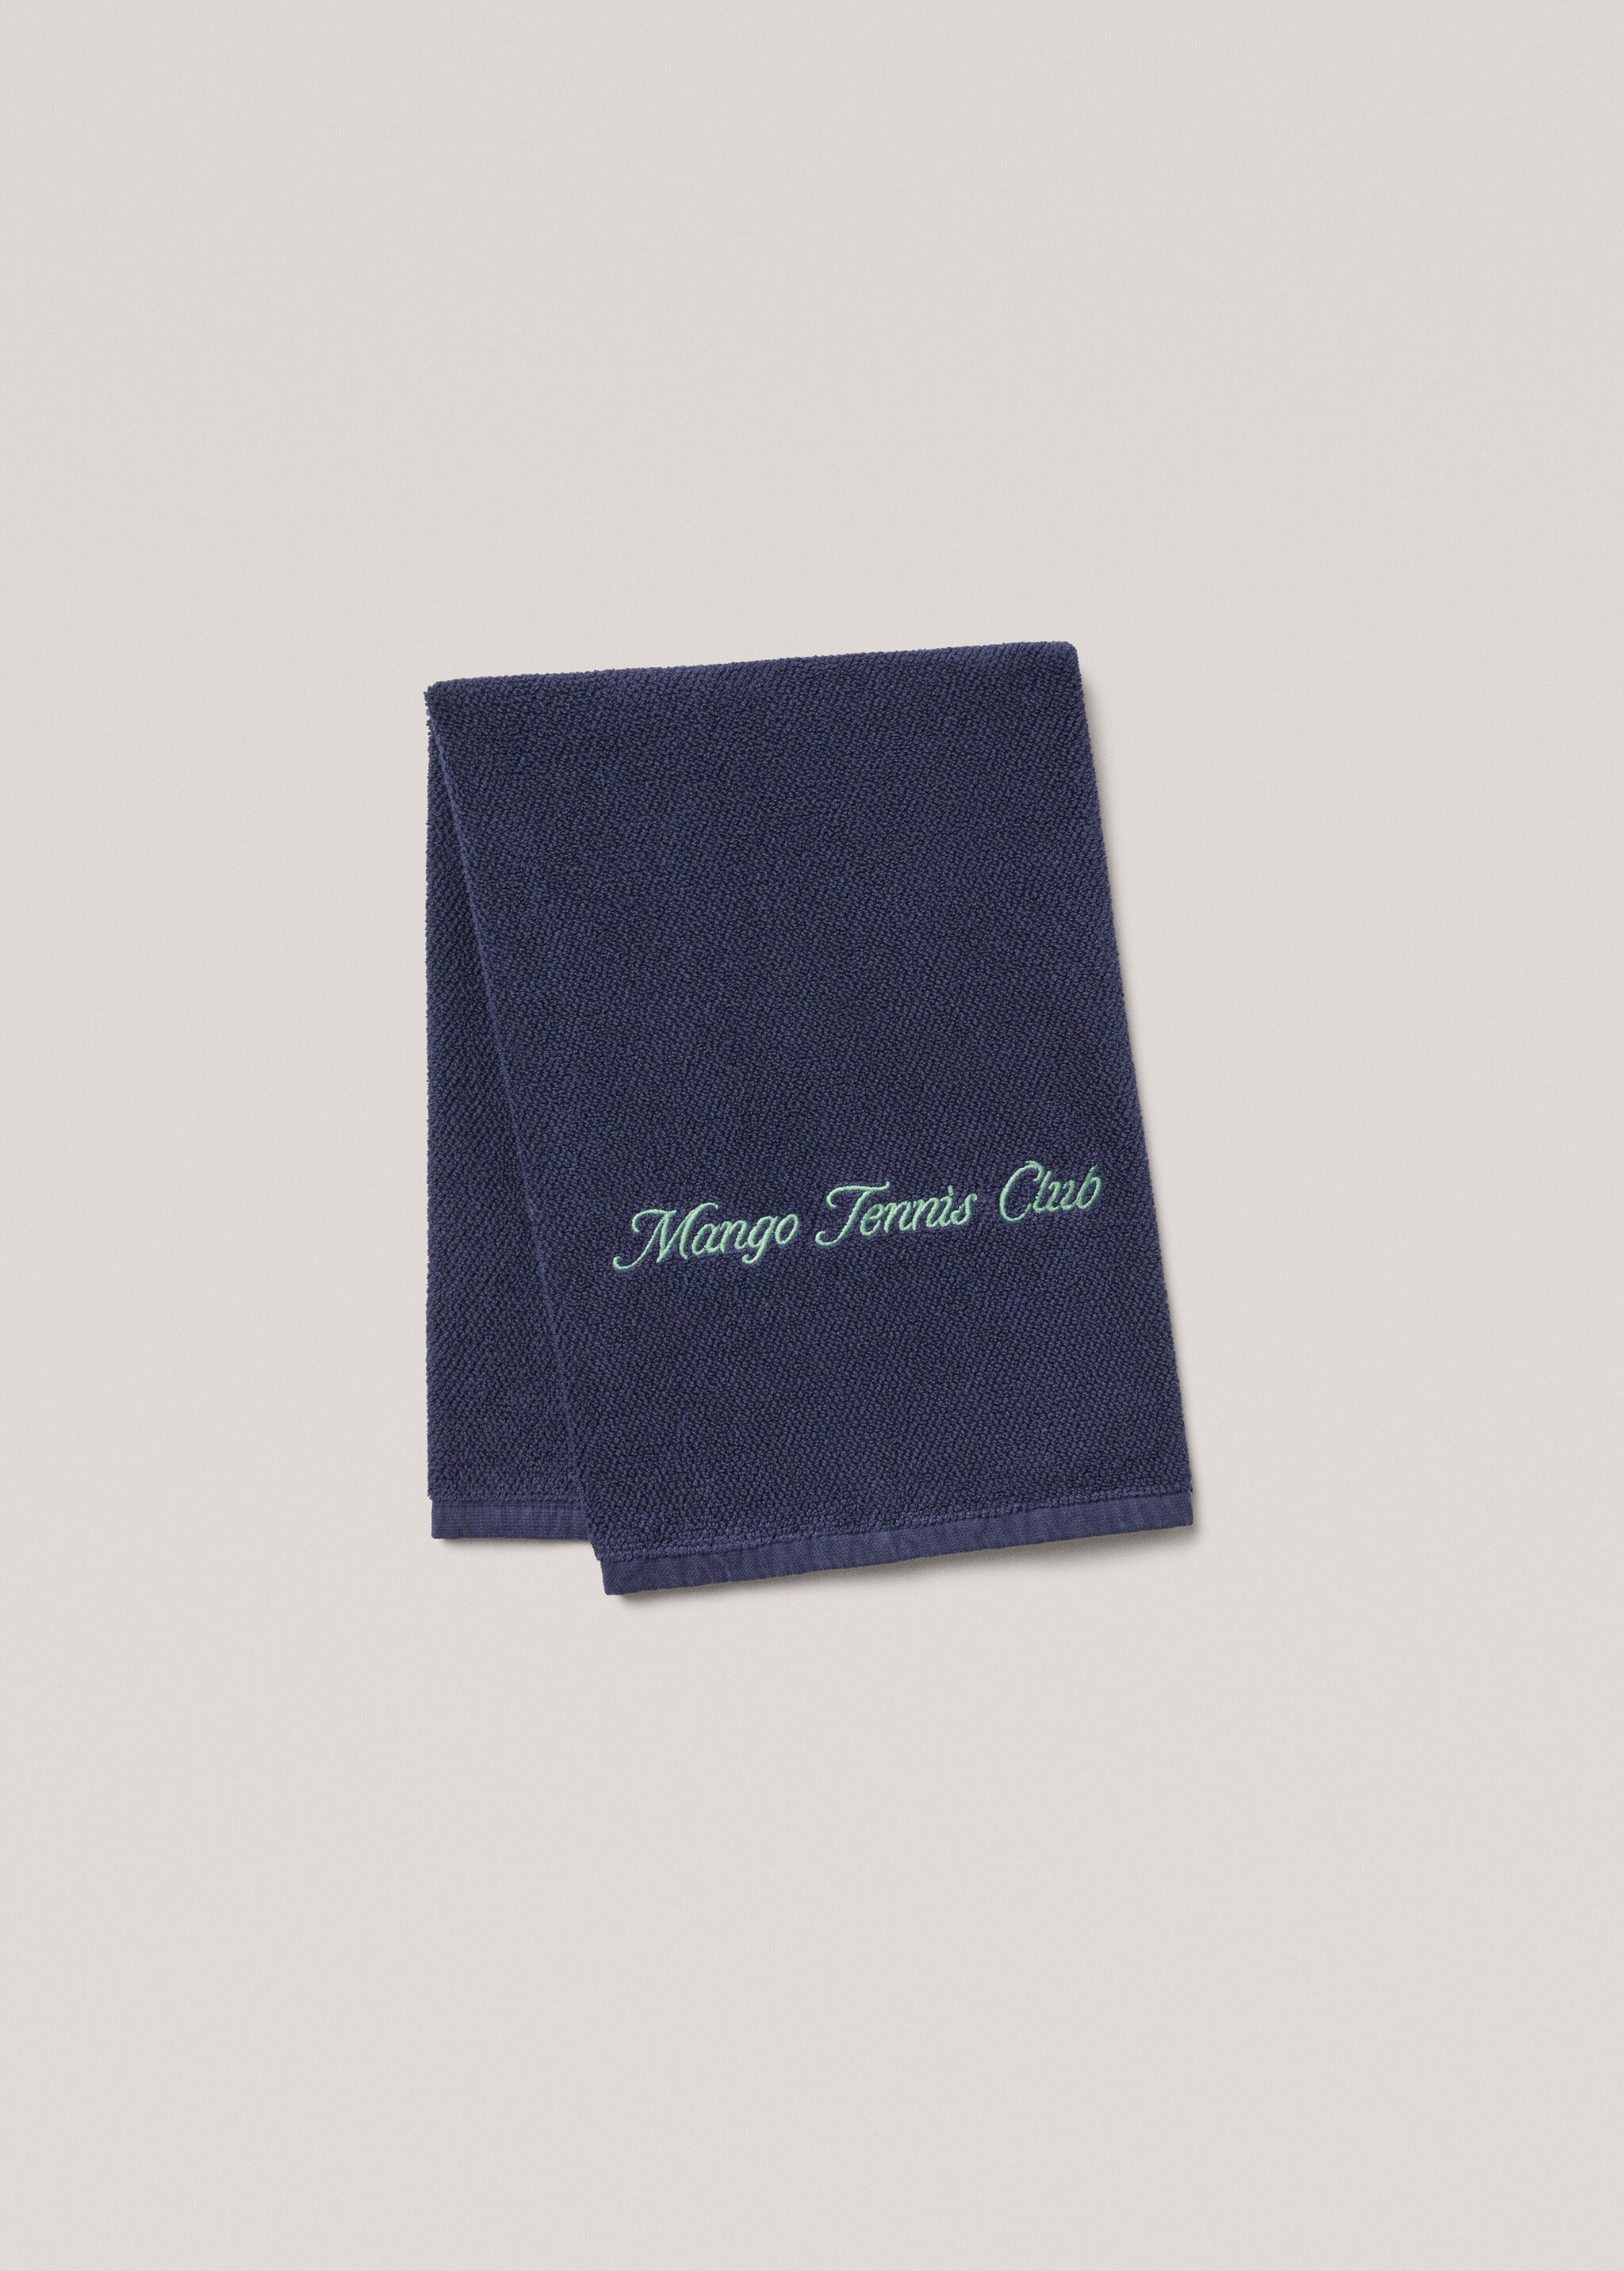 Embroidered cotton sports towel - Article without model